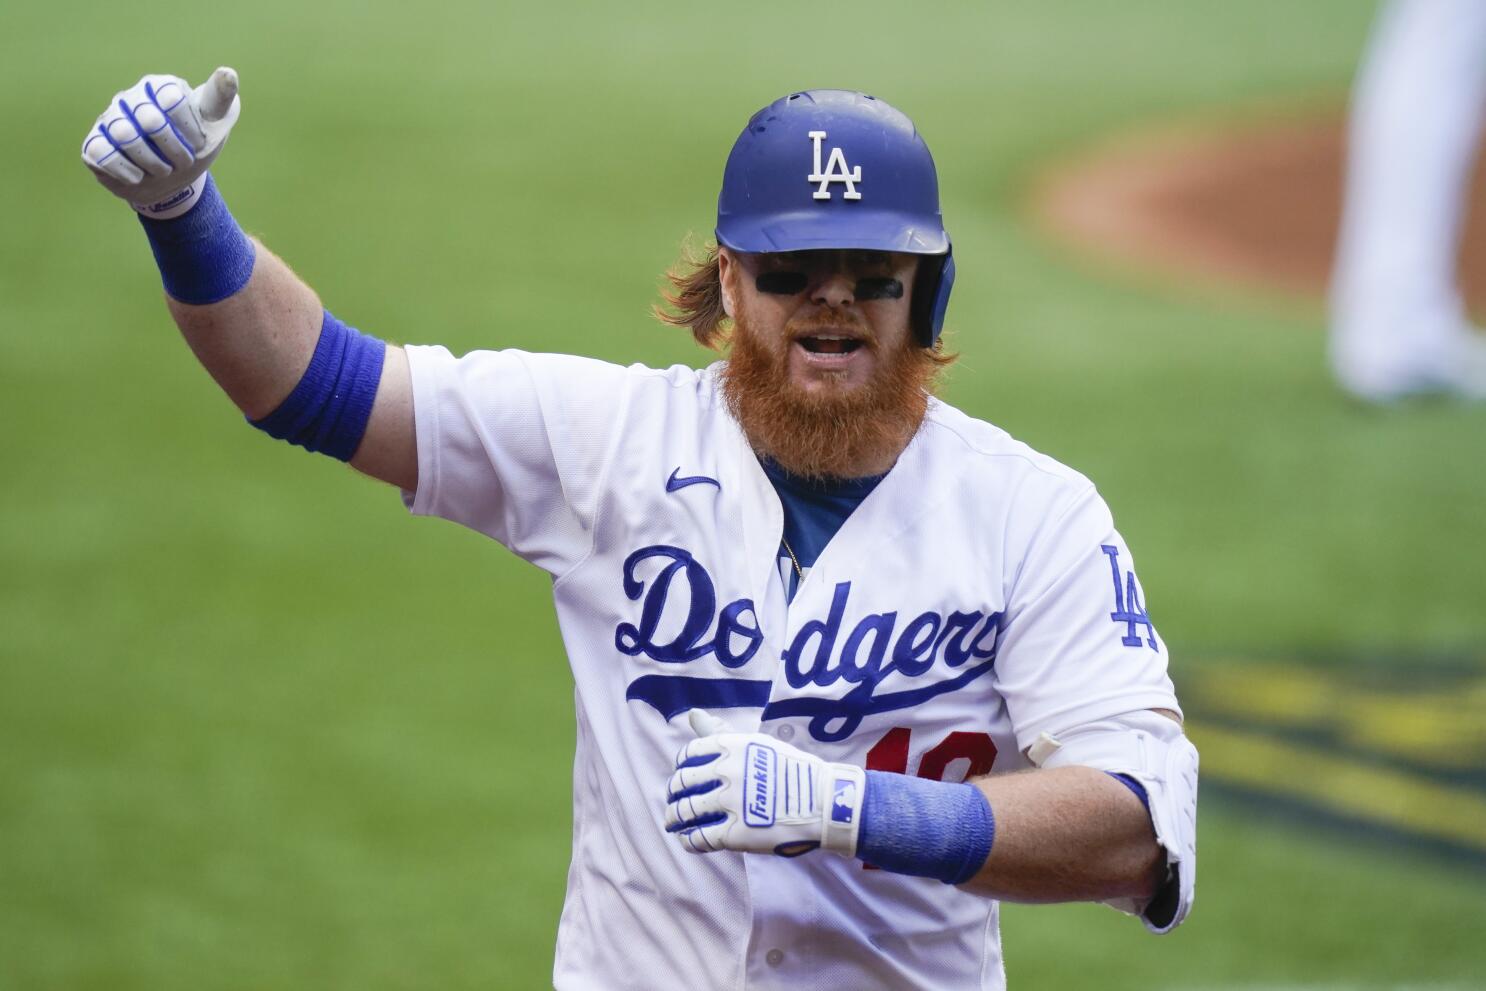 Justin Turner is staying with the Dodgers